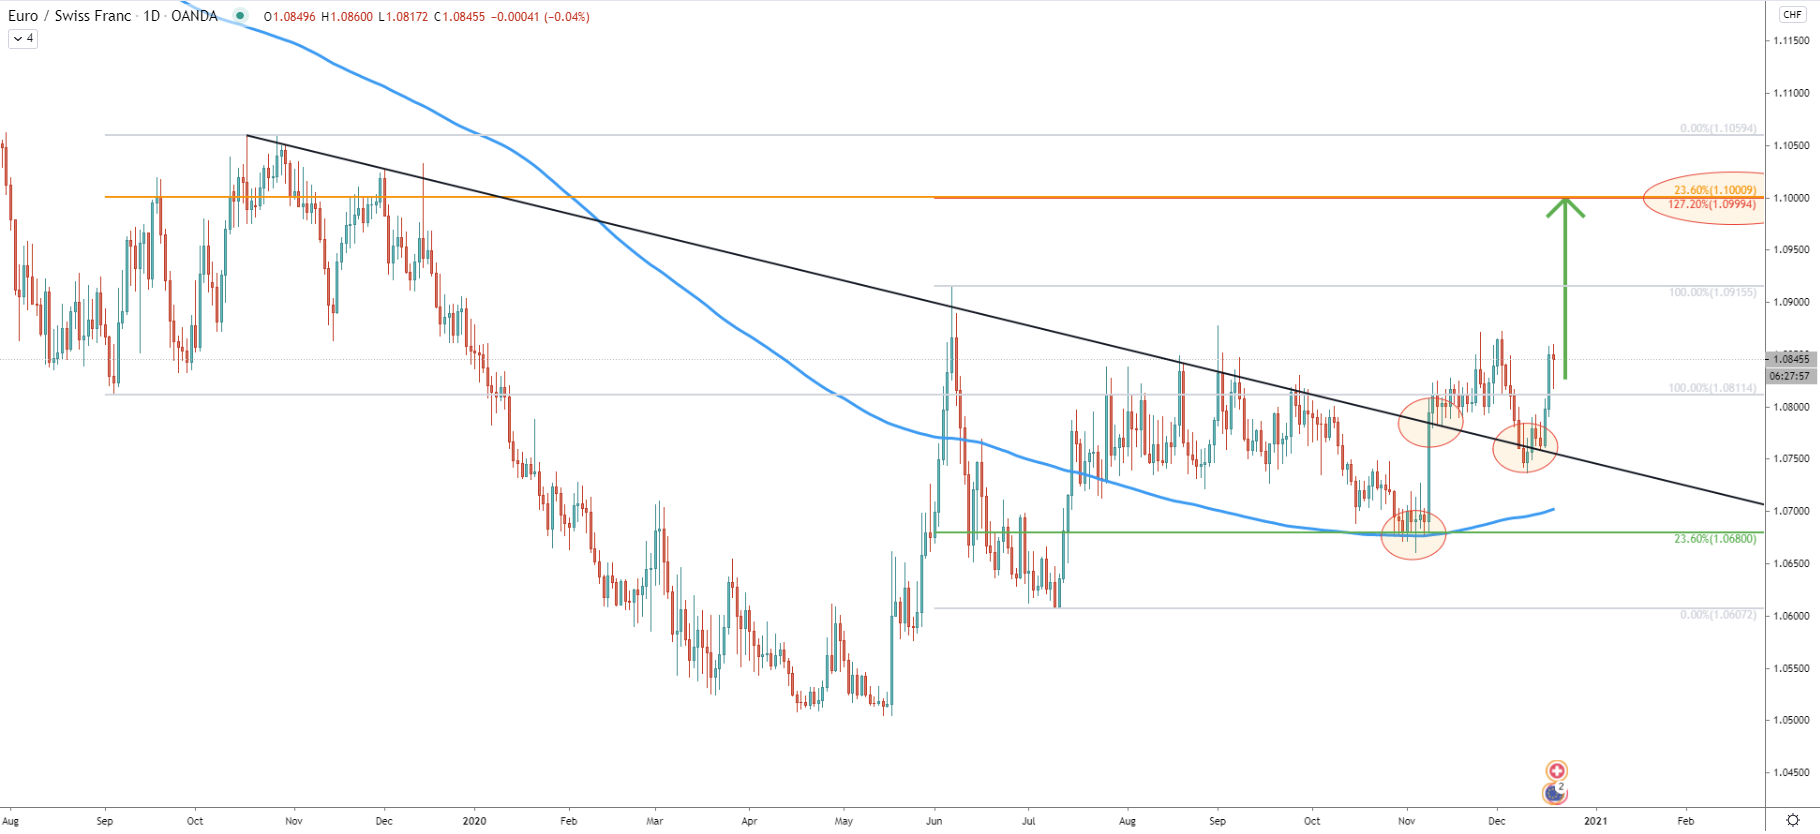 EUR/CHF Daily Technical Analysis 18 Dec 2020